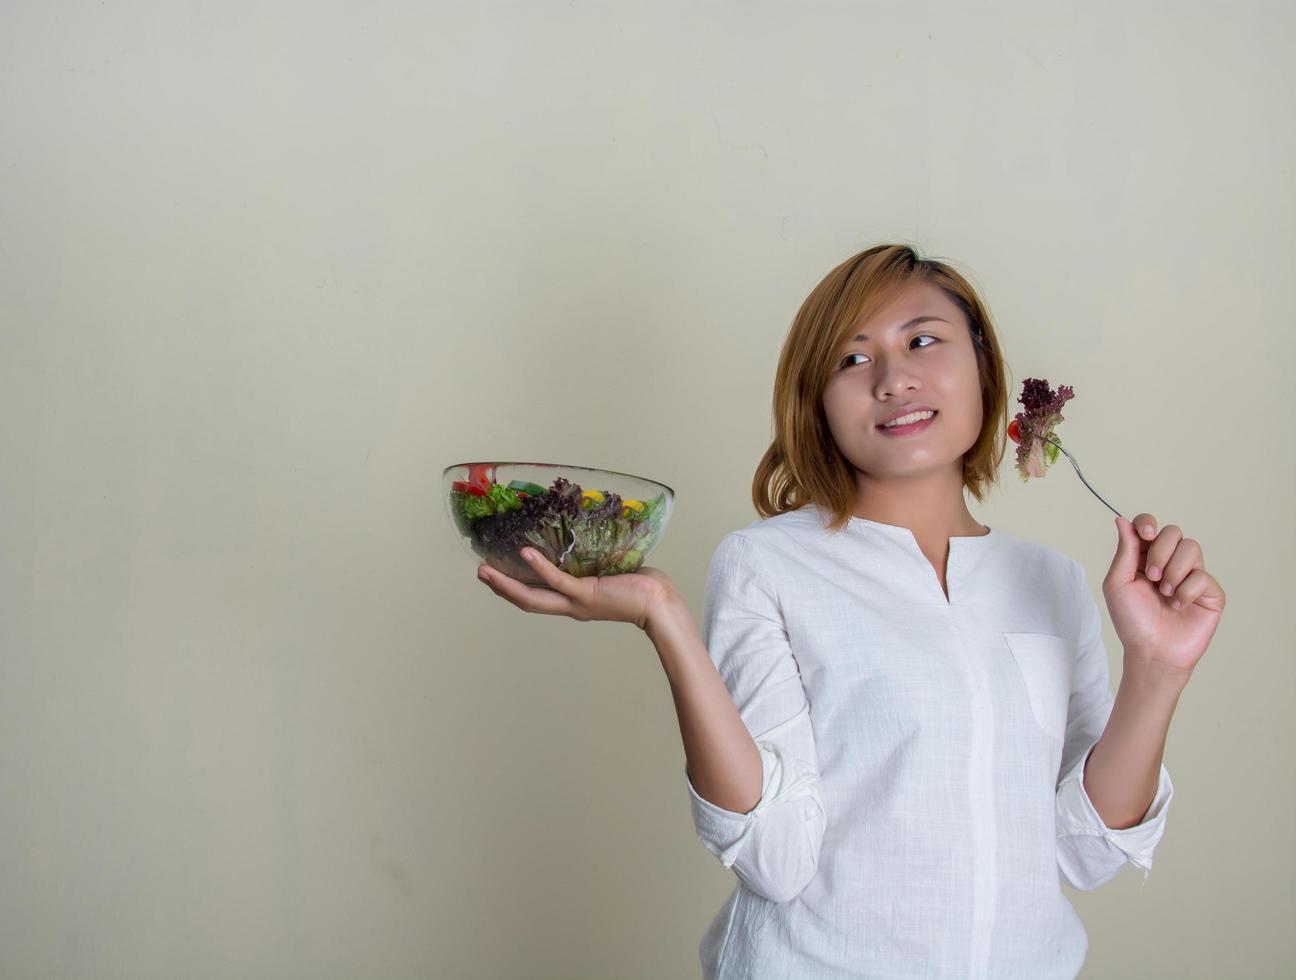 beautiful woman standing holding bowl of salad eating some vegetable photo